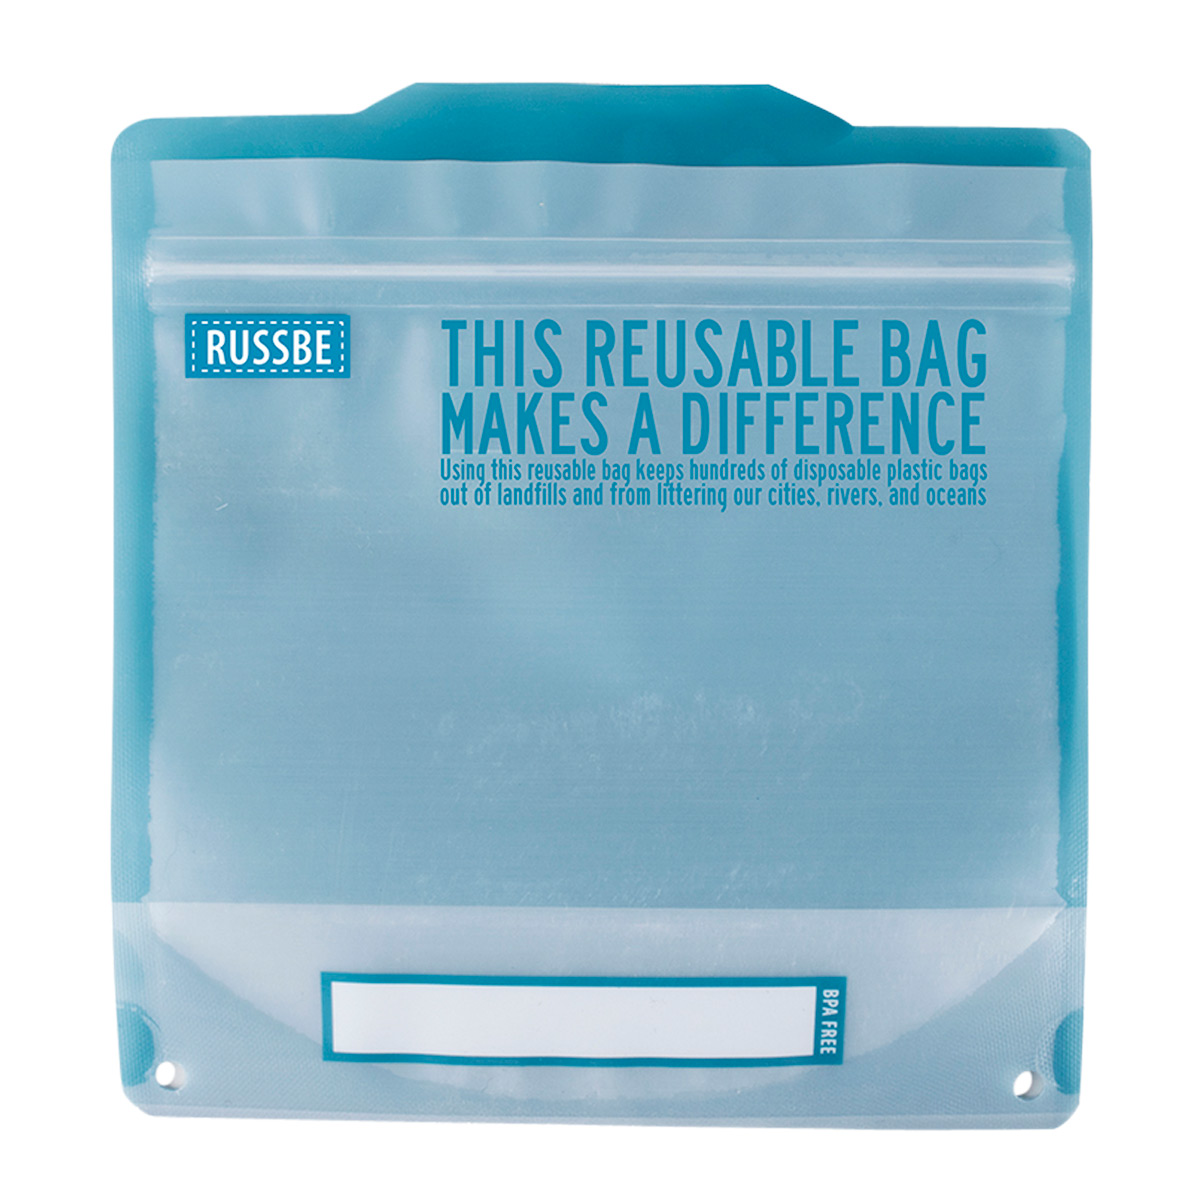 Russbe Reusable Food Storage Bags